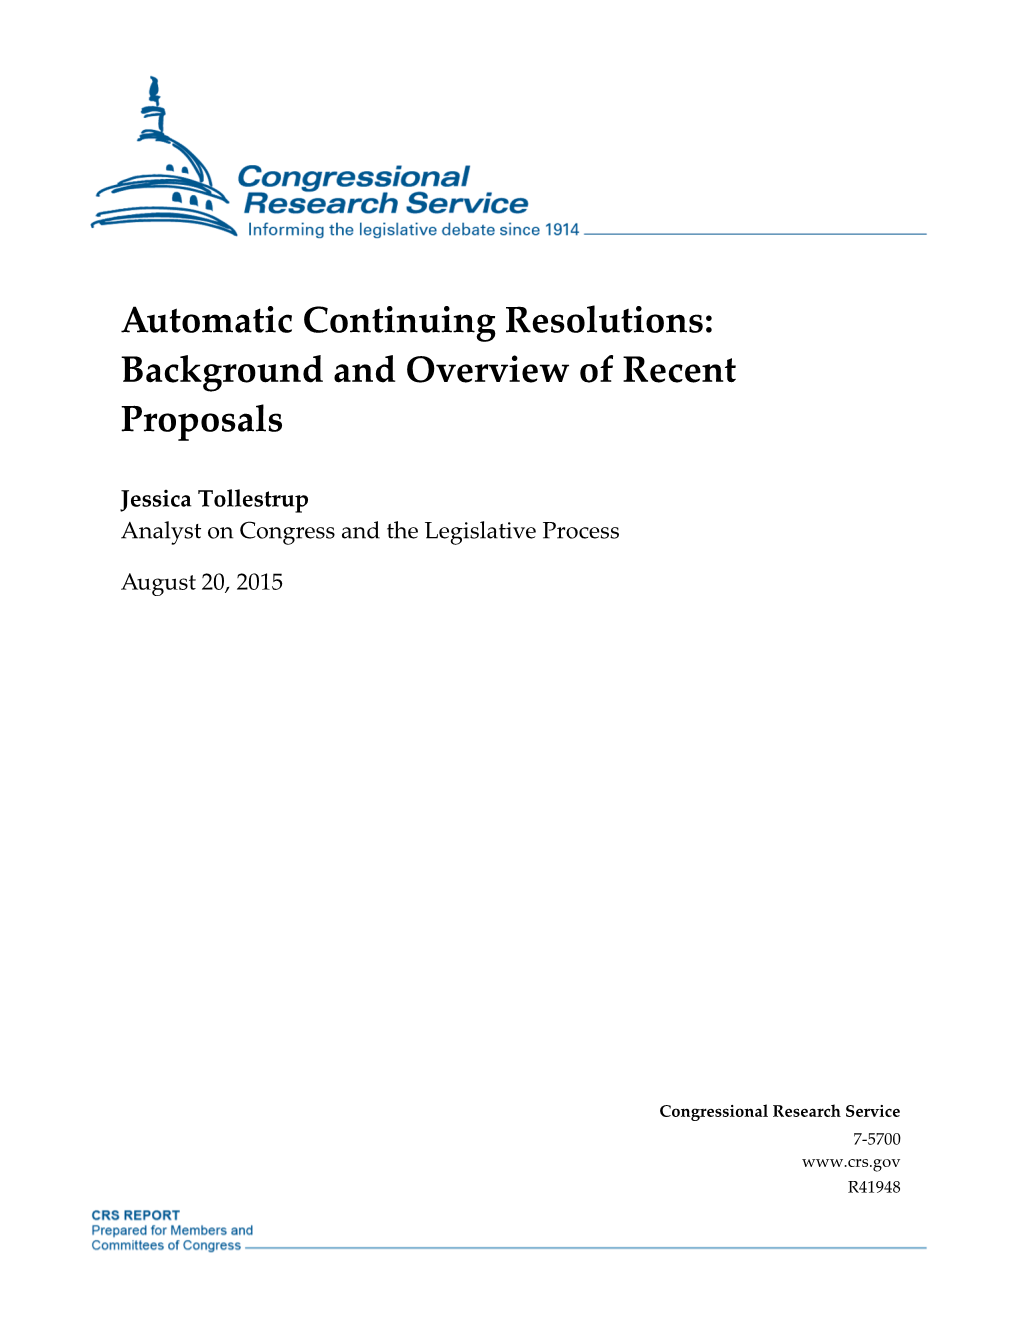 Automatic Continuing Resolutions: Background and Overview of Recent Proposals